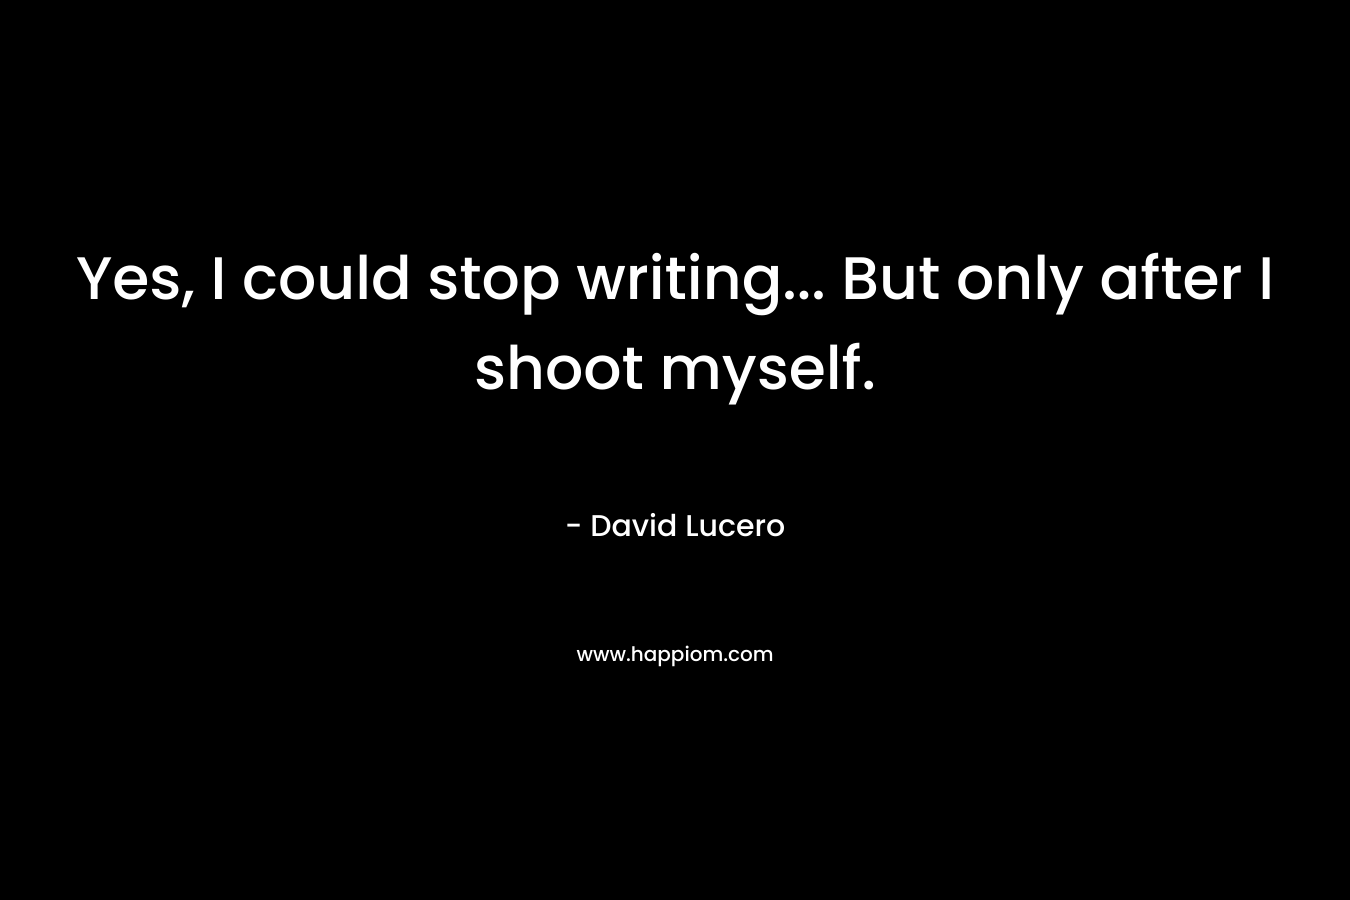 Yes, I could stop writing... But only after I shoot myself.